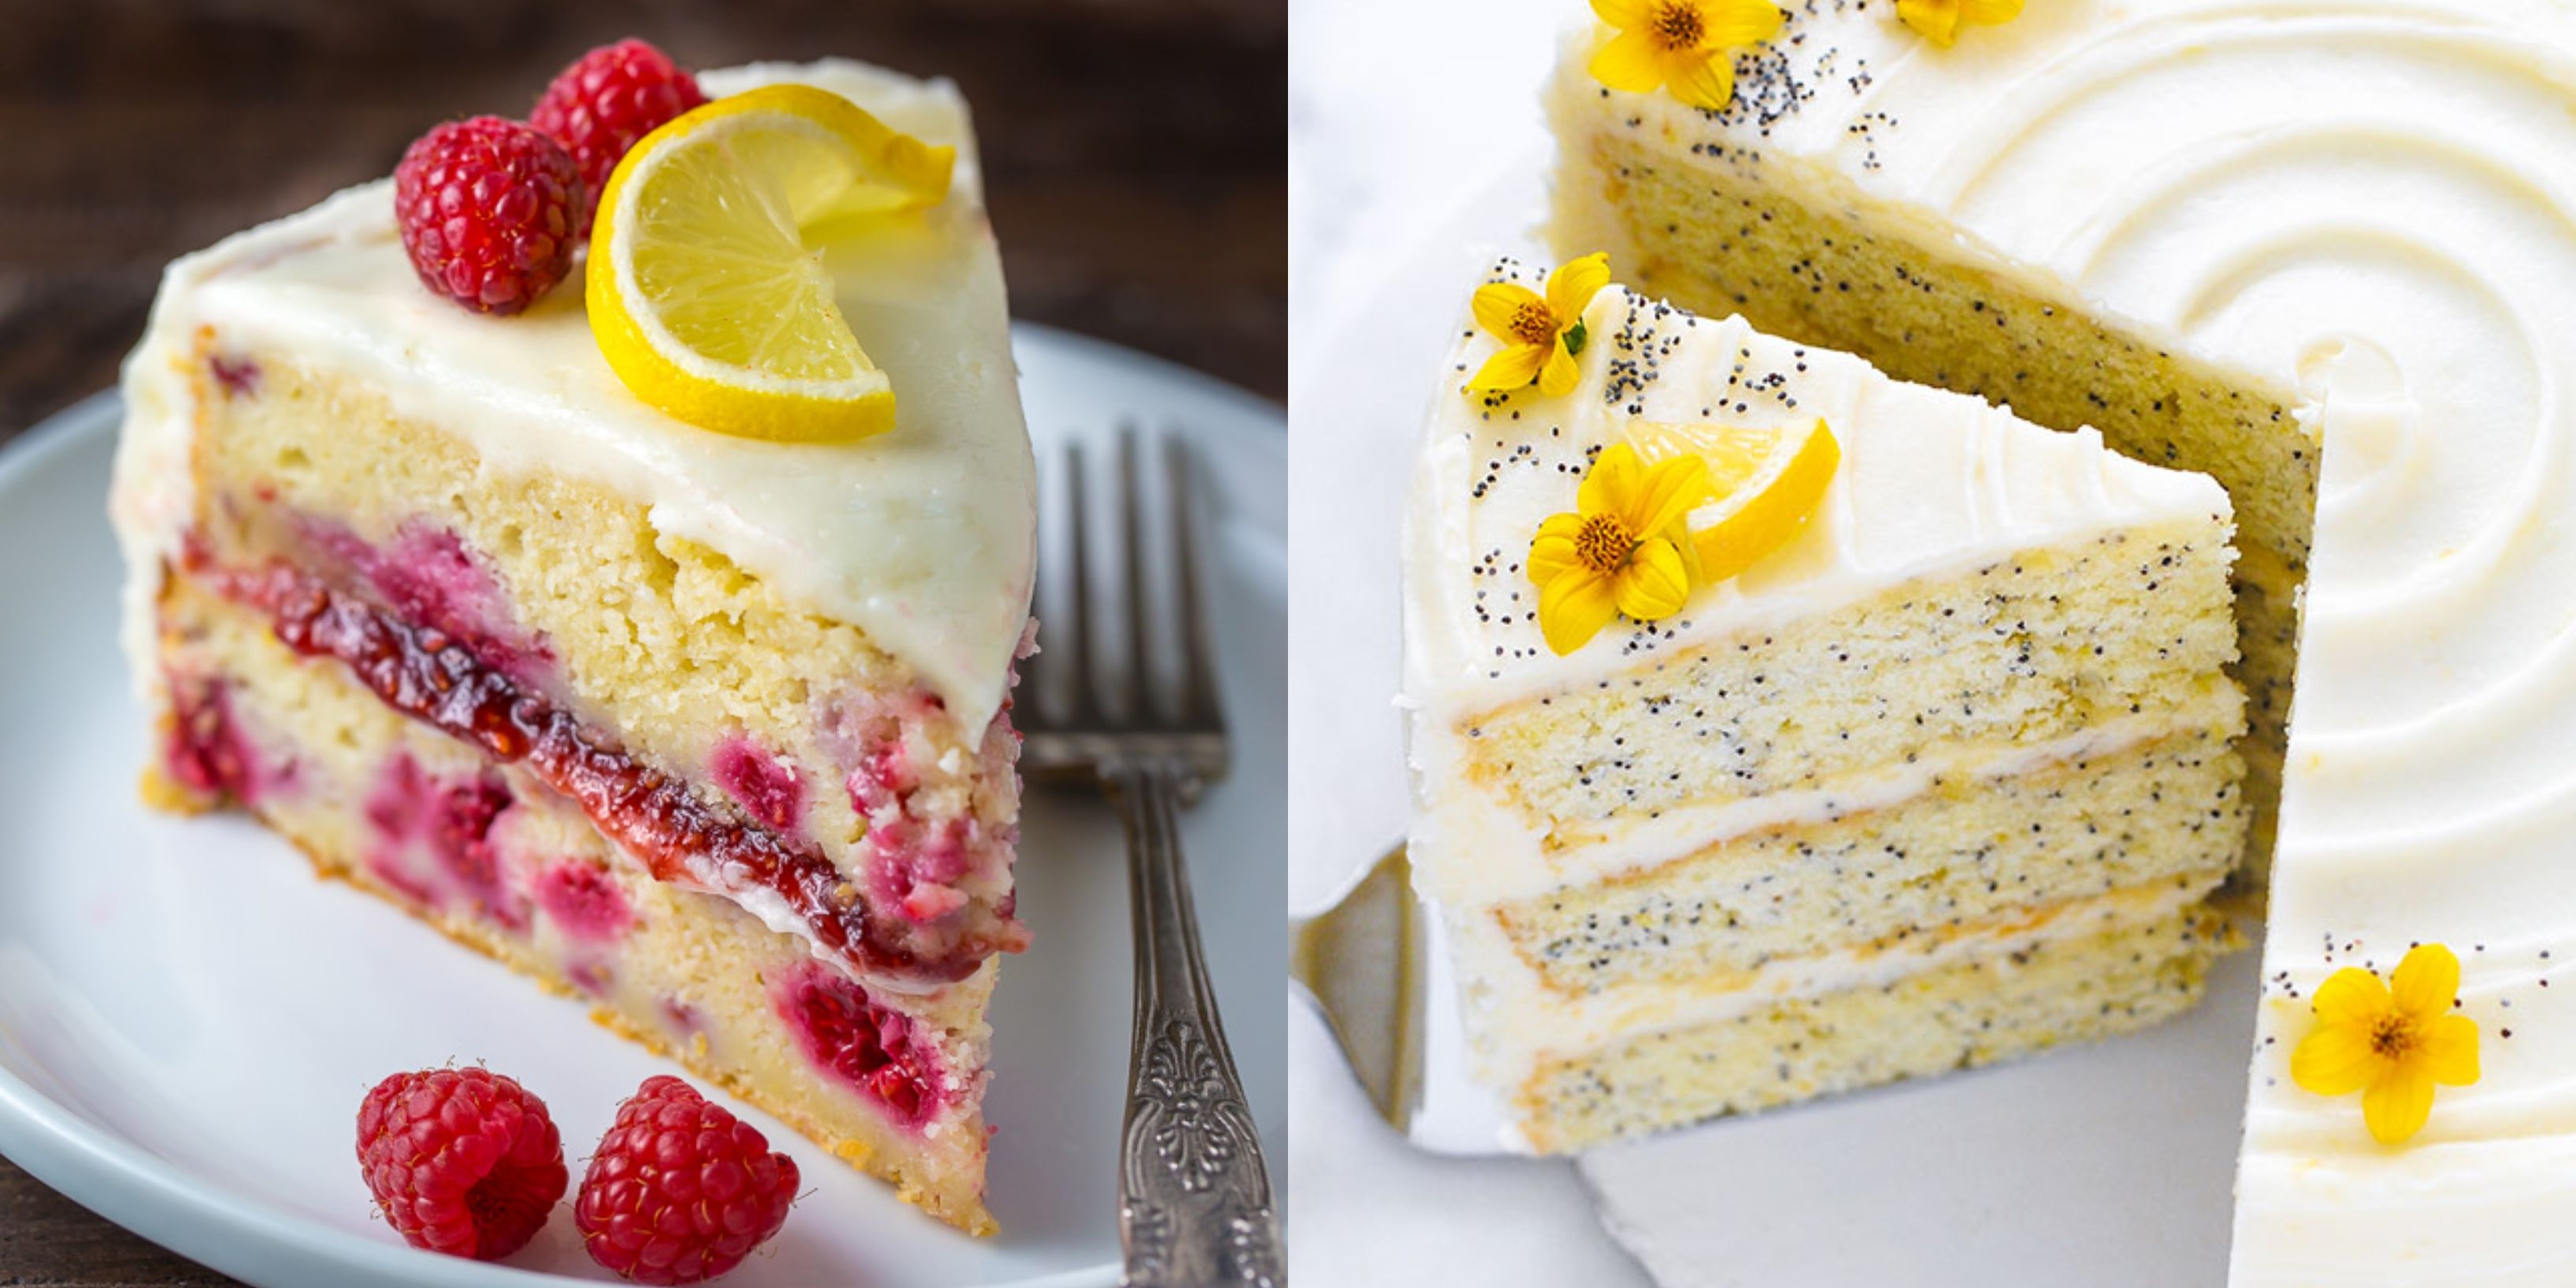 Lemon Curd Cake: Delicious Recipe from Scratch